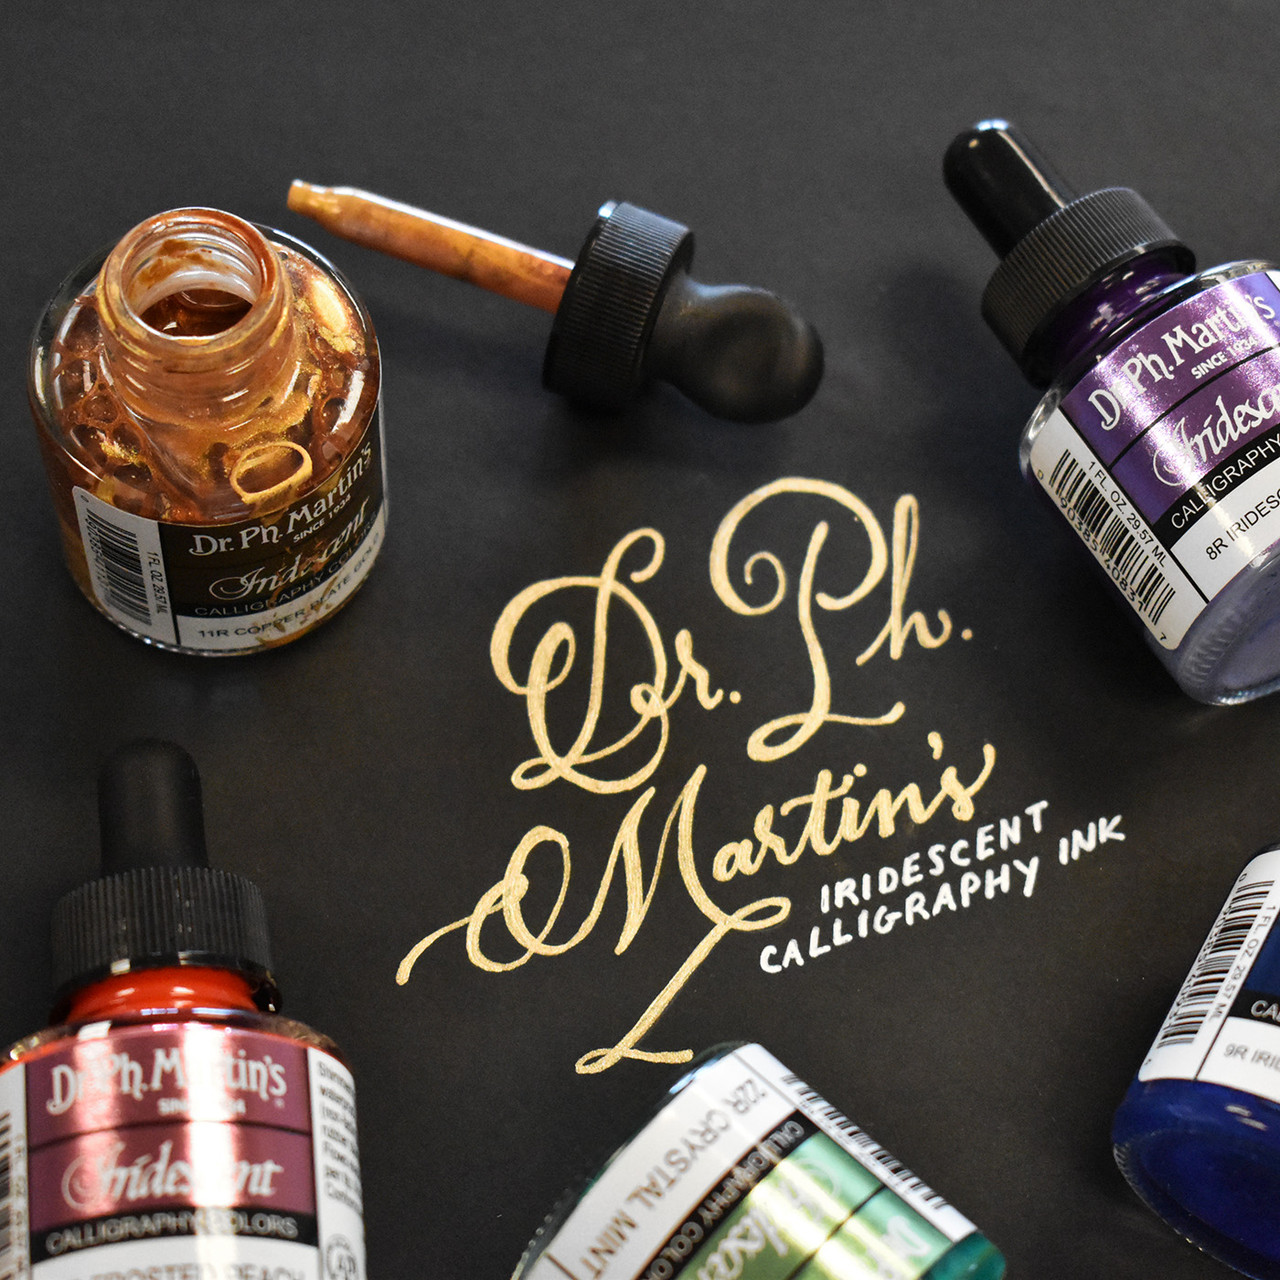 The best calligraphy inks